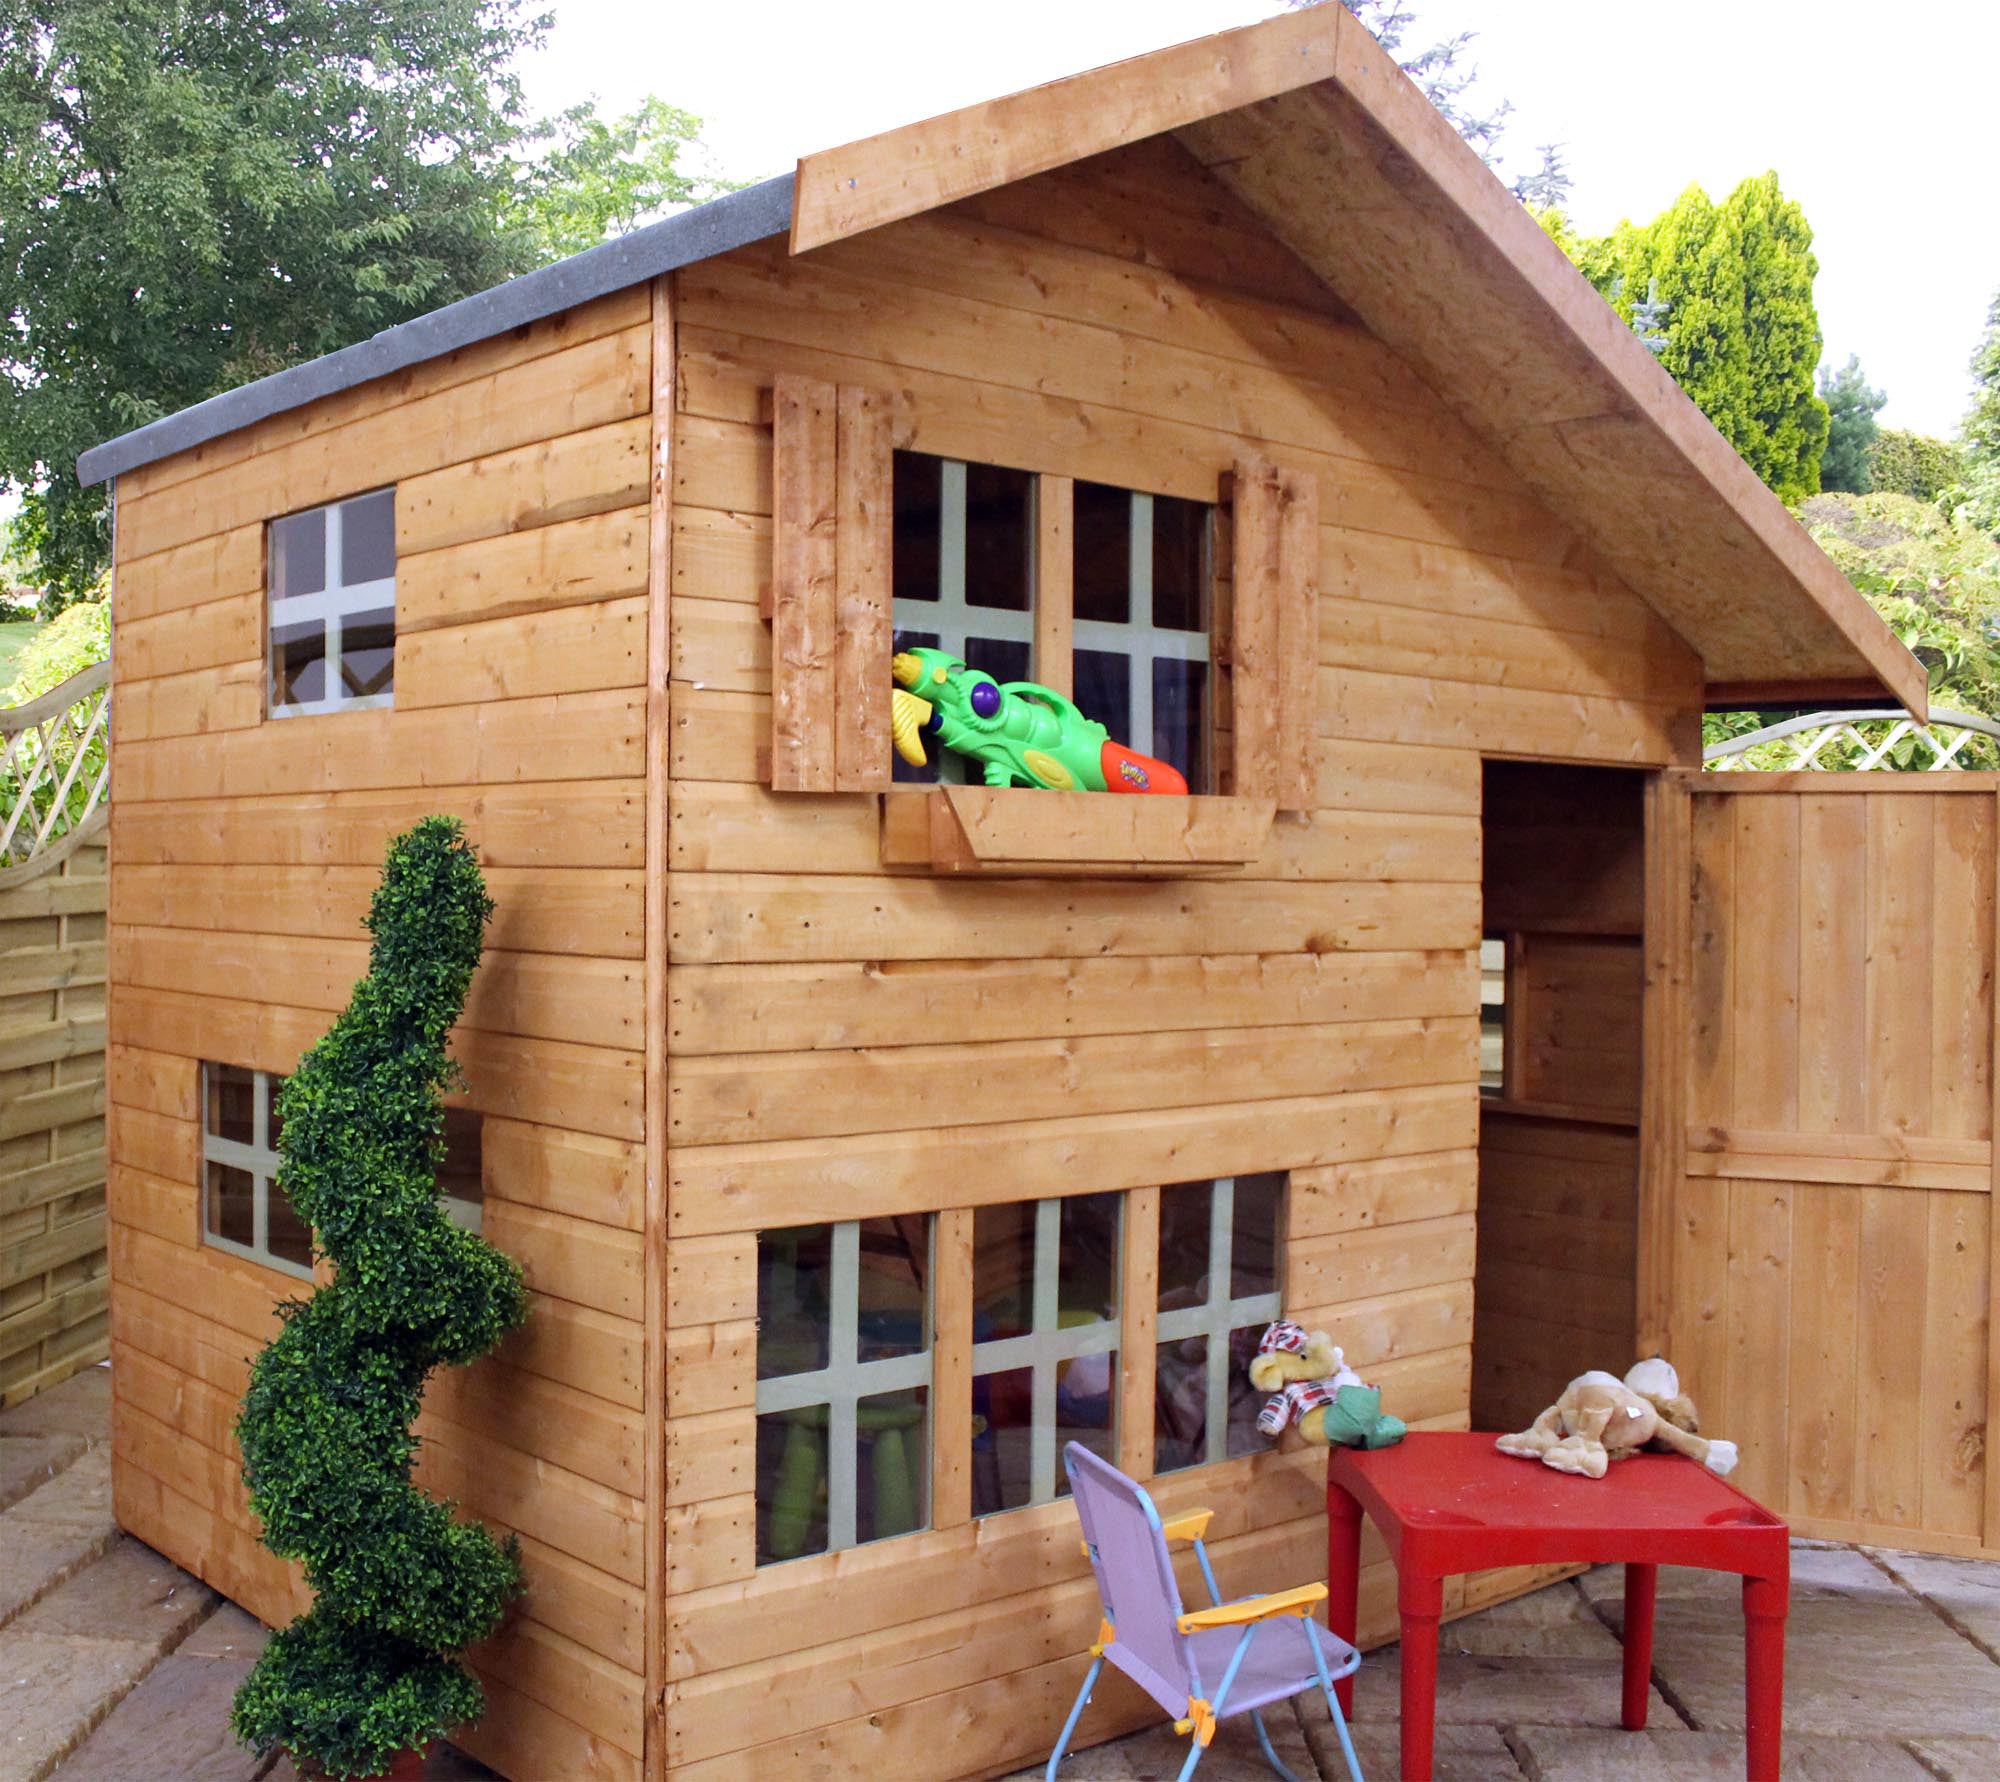 8' x 6' Large Double Storey Wooden Playhouse | Garden Toy 